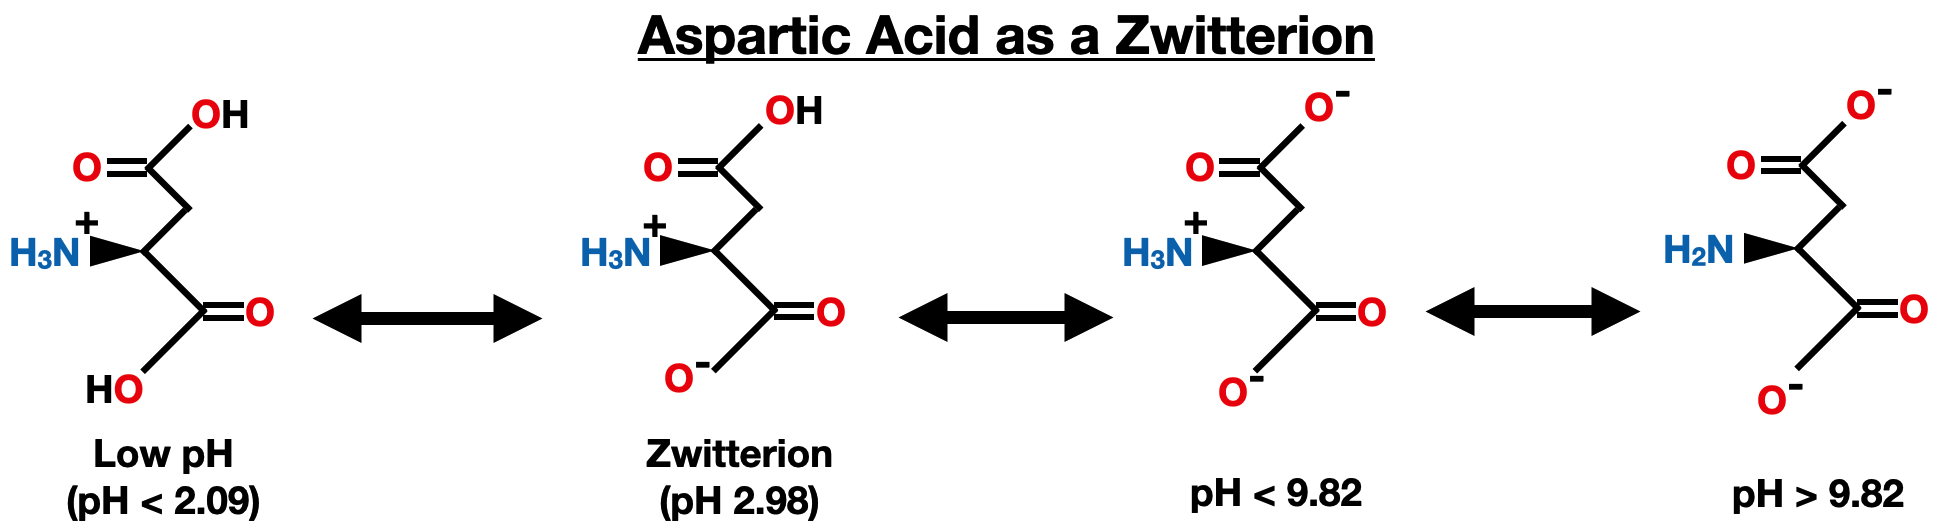 pKa and Electrical Properties of Amino Acids - aspartic acid zwitterion